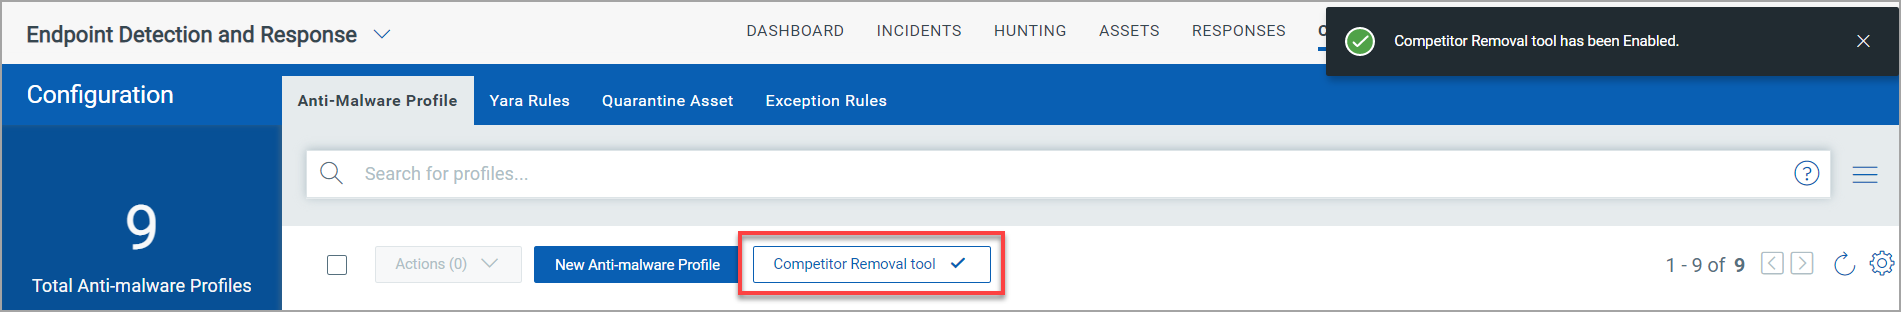 Competitor Removal Tool notification.